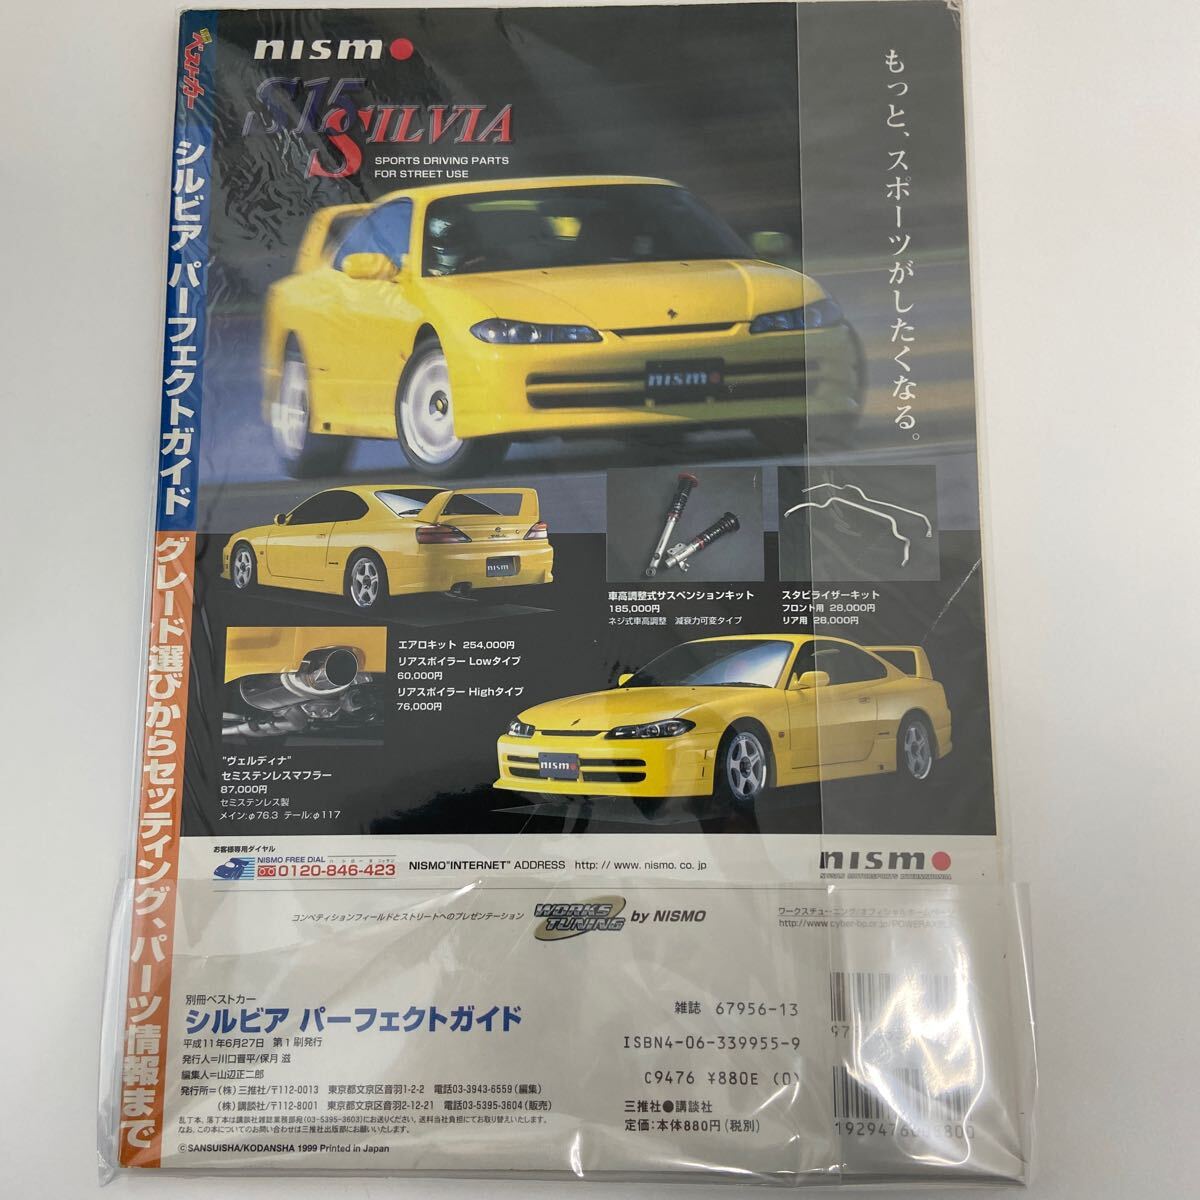 NISSAN SILVIA S15 PERFECT GUIDE 別冊ベストカー 日産シルビア パーフェクトガイド spec R S チューニング完全 本の画像2